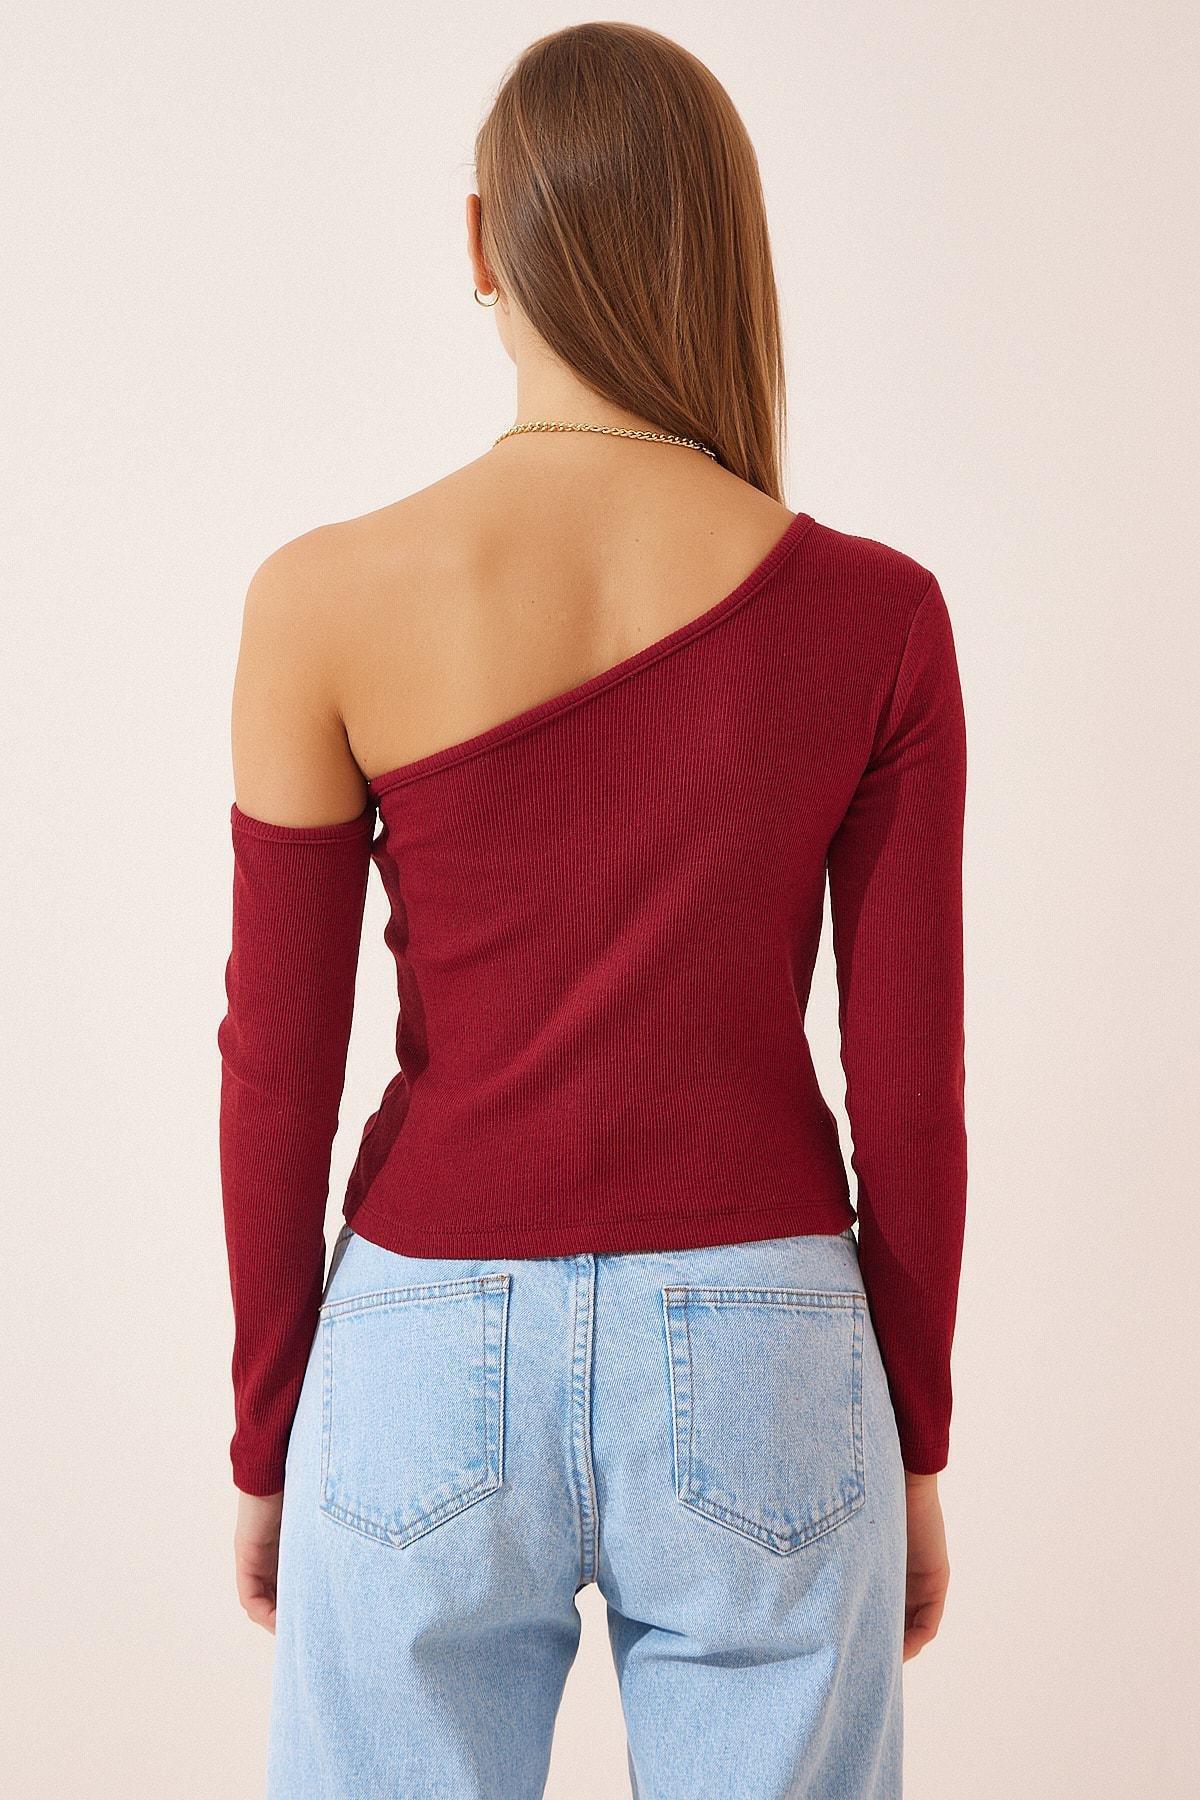 Happiness - Burgundy Asymmetrical Off-Shoulder Fitted Top